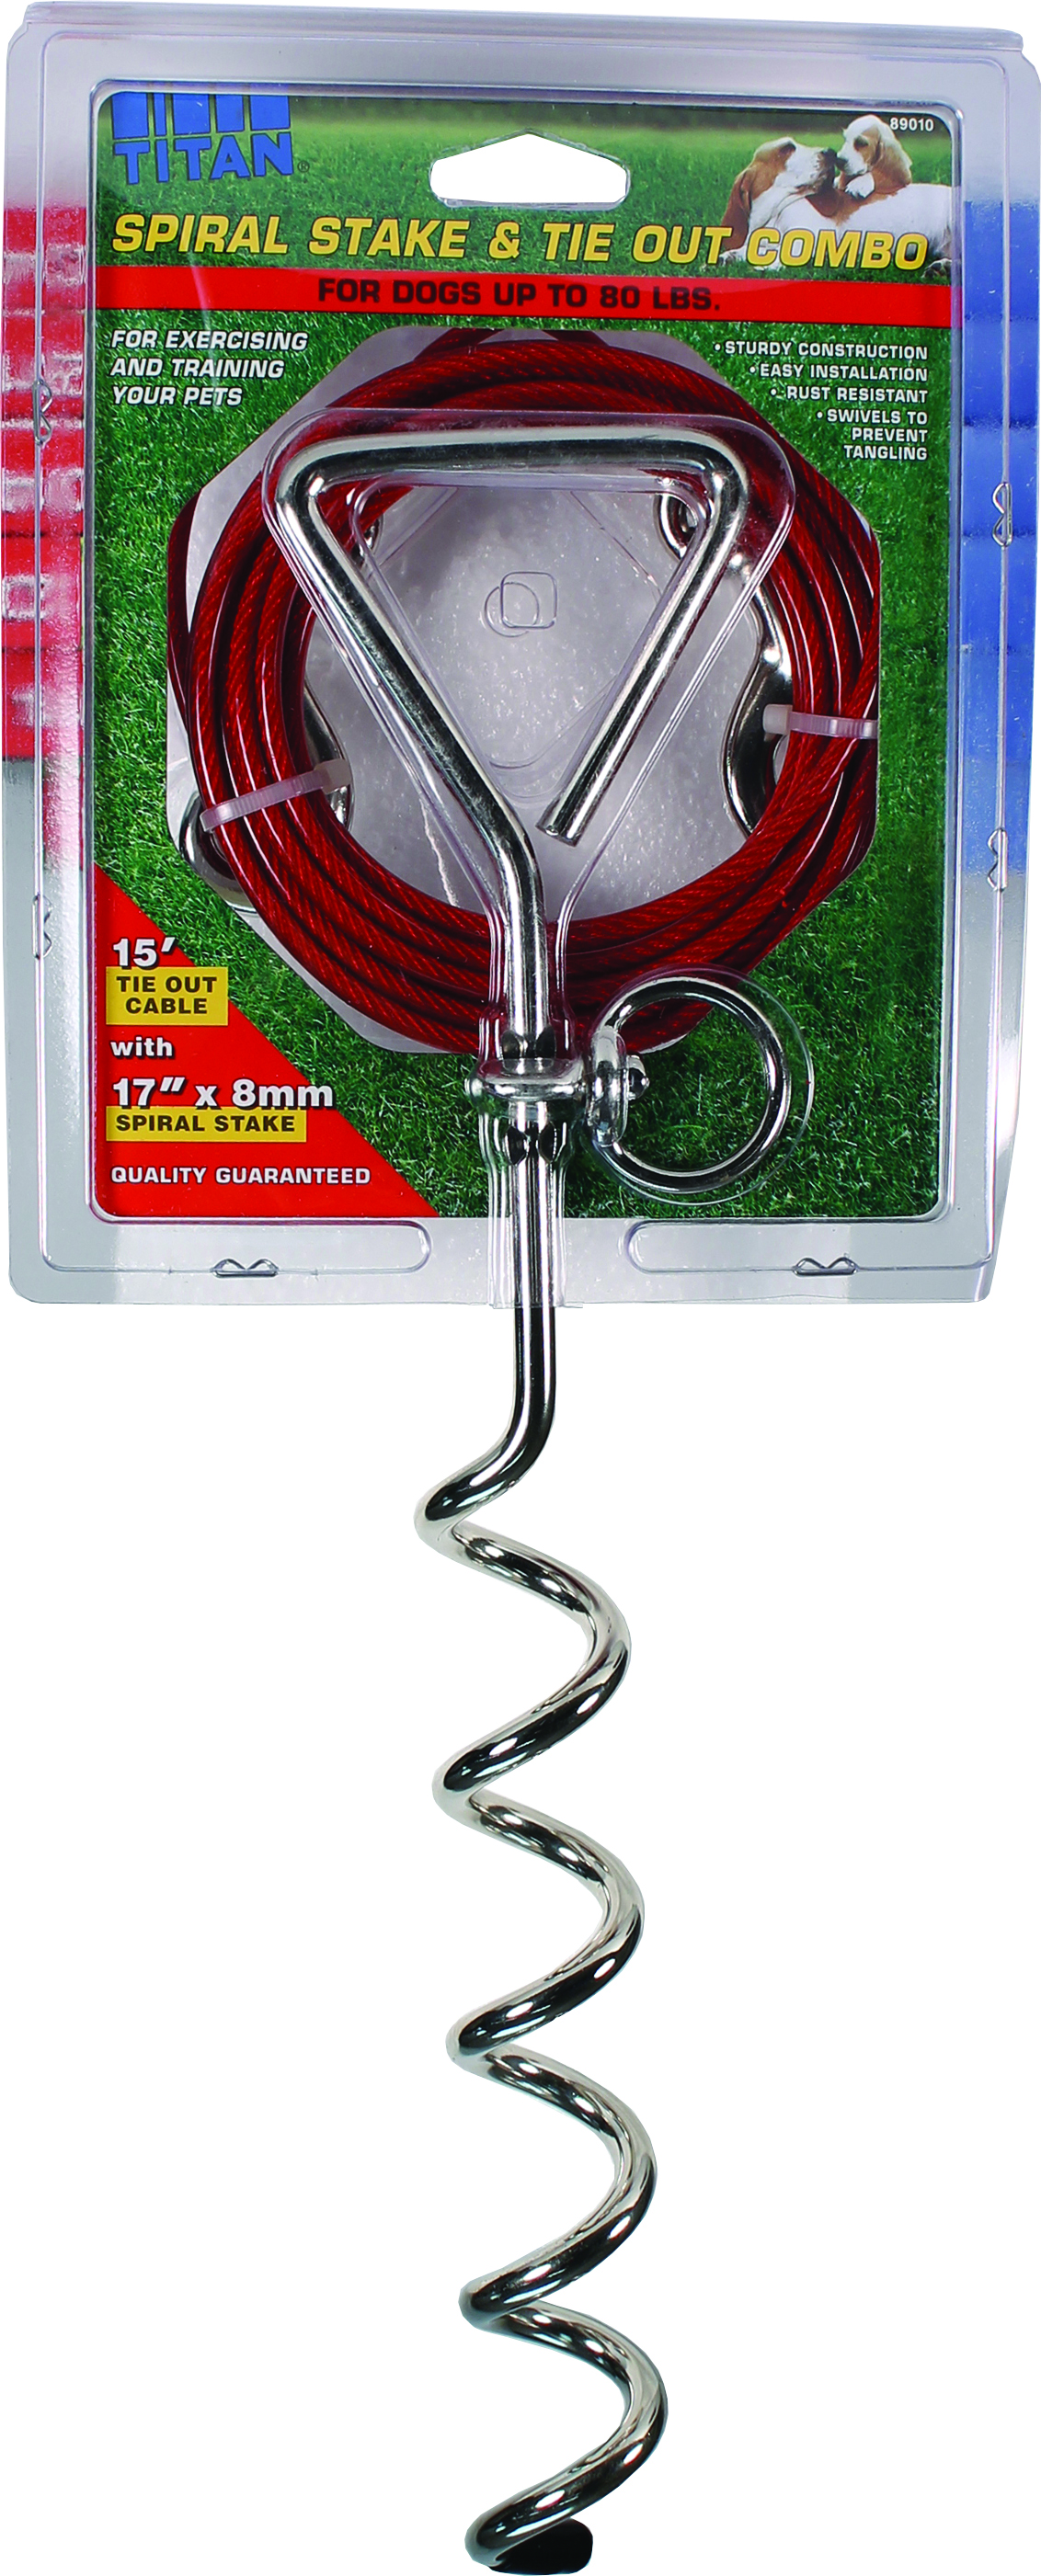 TITAN SPIRAL STAKE & TIE OUT COMBO